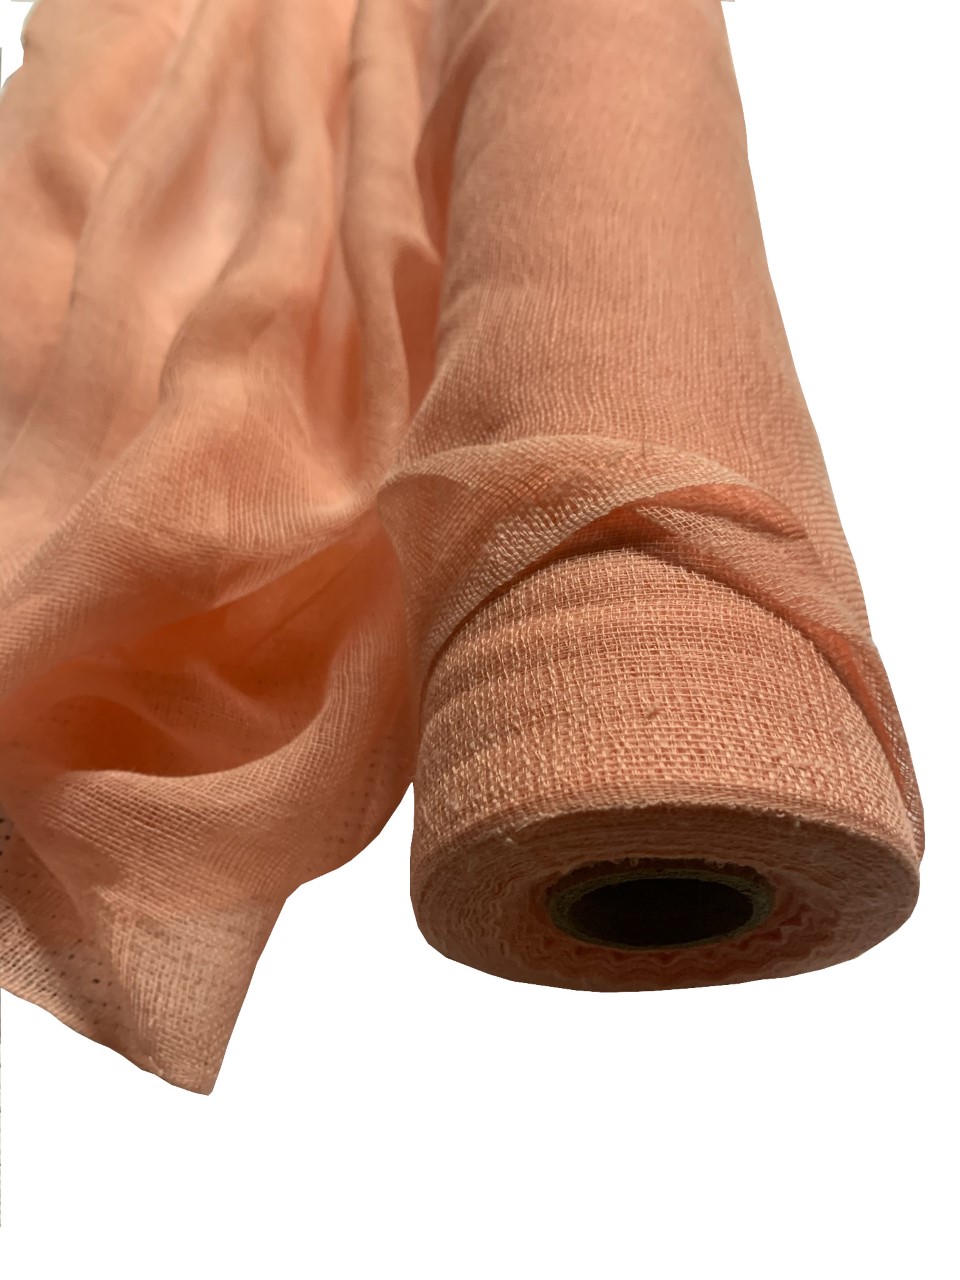 36" Peach Cheesecloth 100 Foot Roll - 100% Cotton